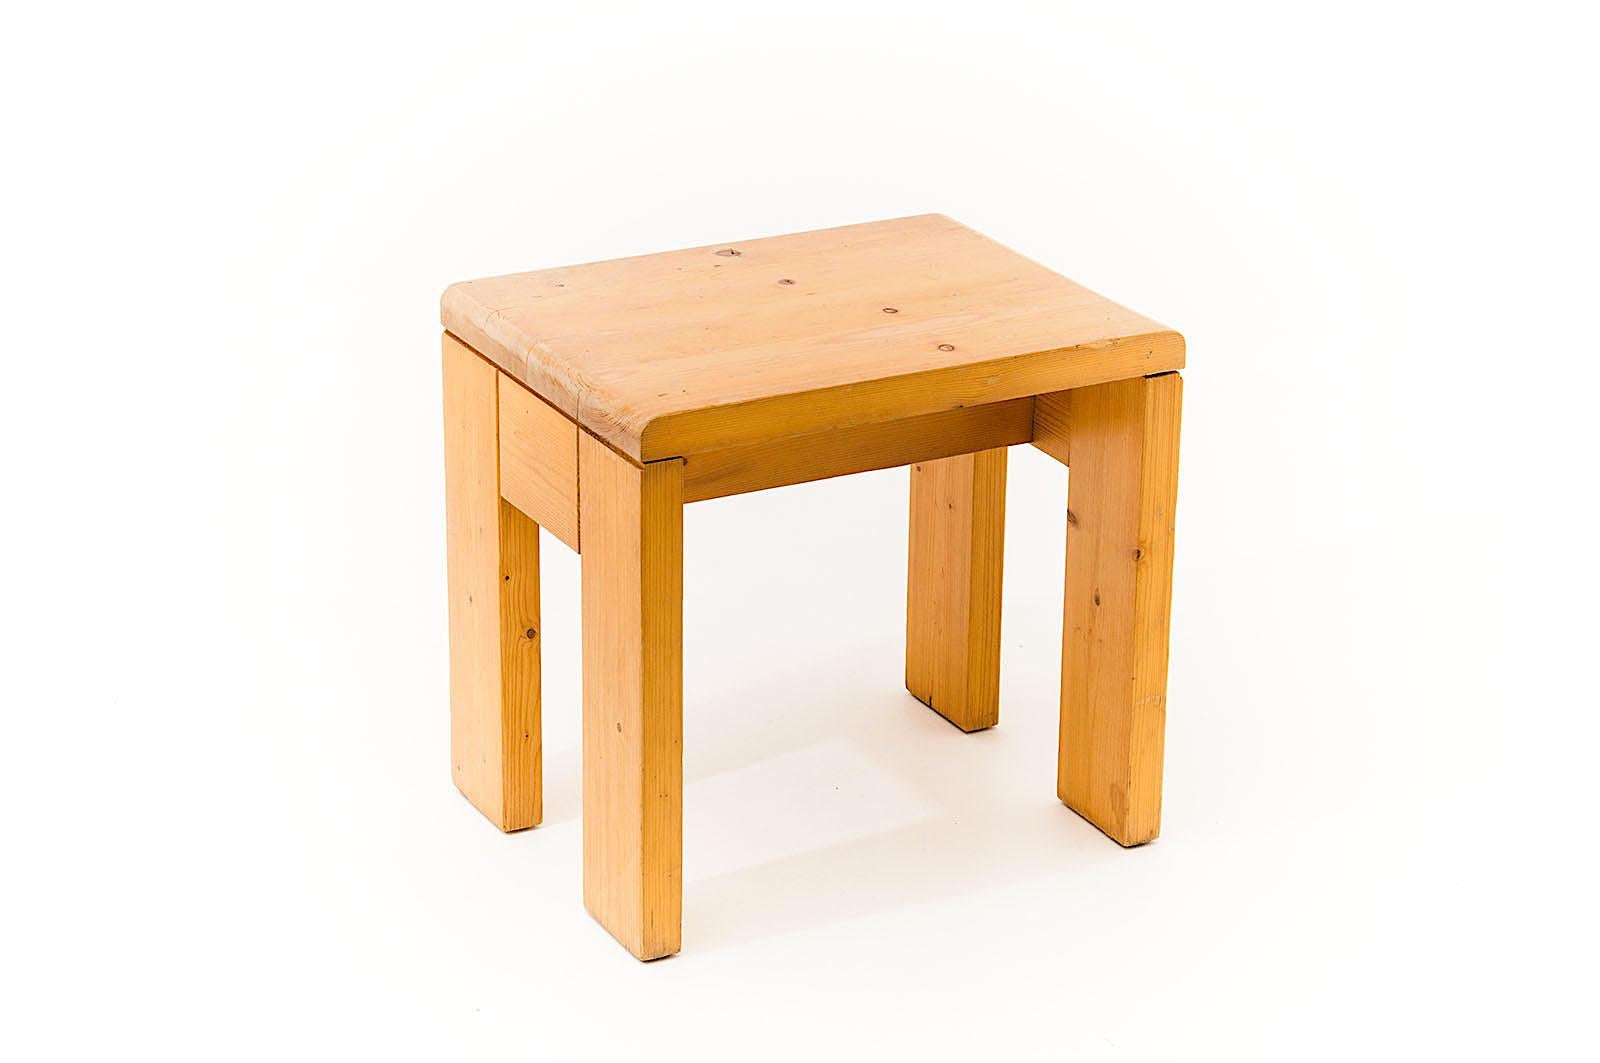 This stool by Charlotte Perriand is in pine, in a blond color. This is from her last creation Period Minimalist. After she studied under the direction of Le Corbusier, she worked with him. Then she had a partnership with Jean Prouvé, to furnish an